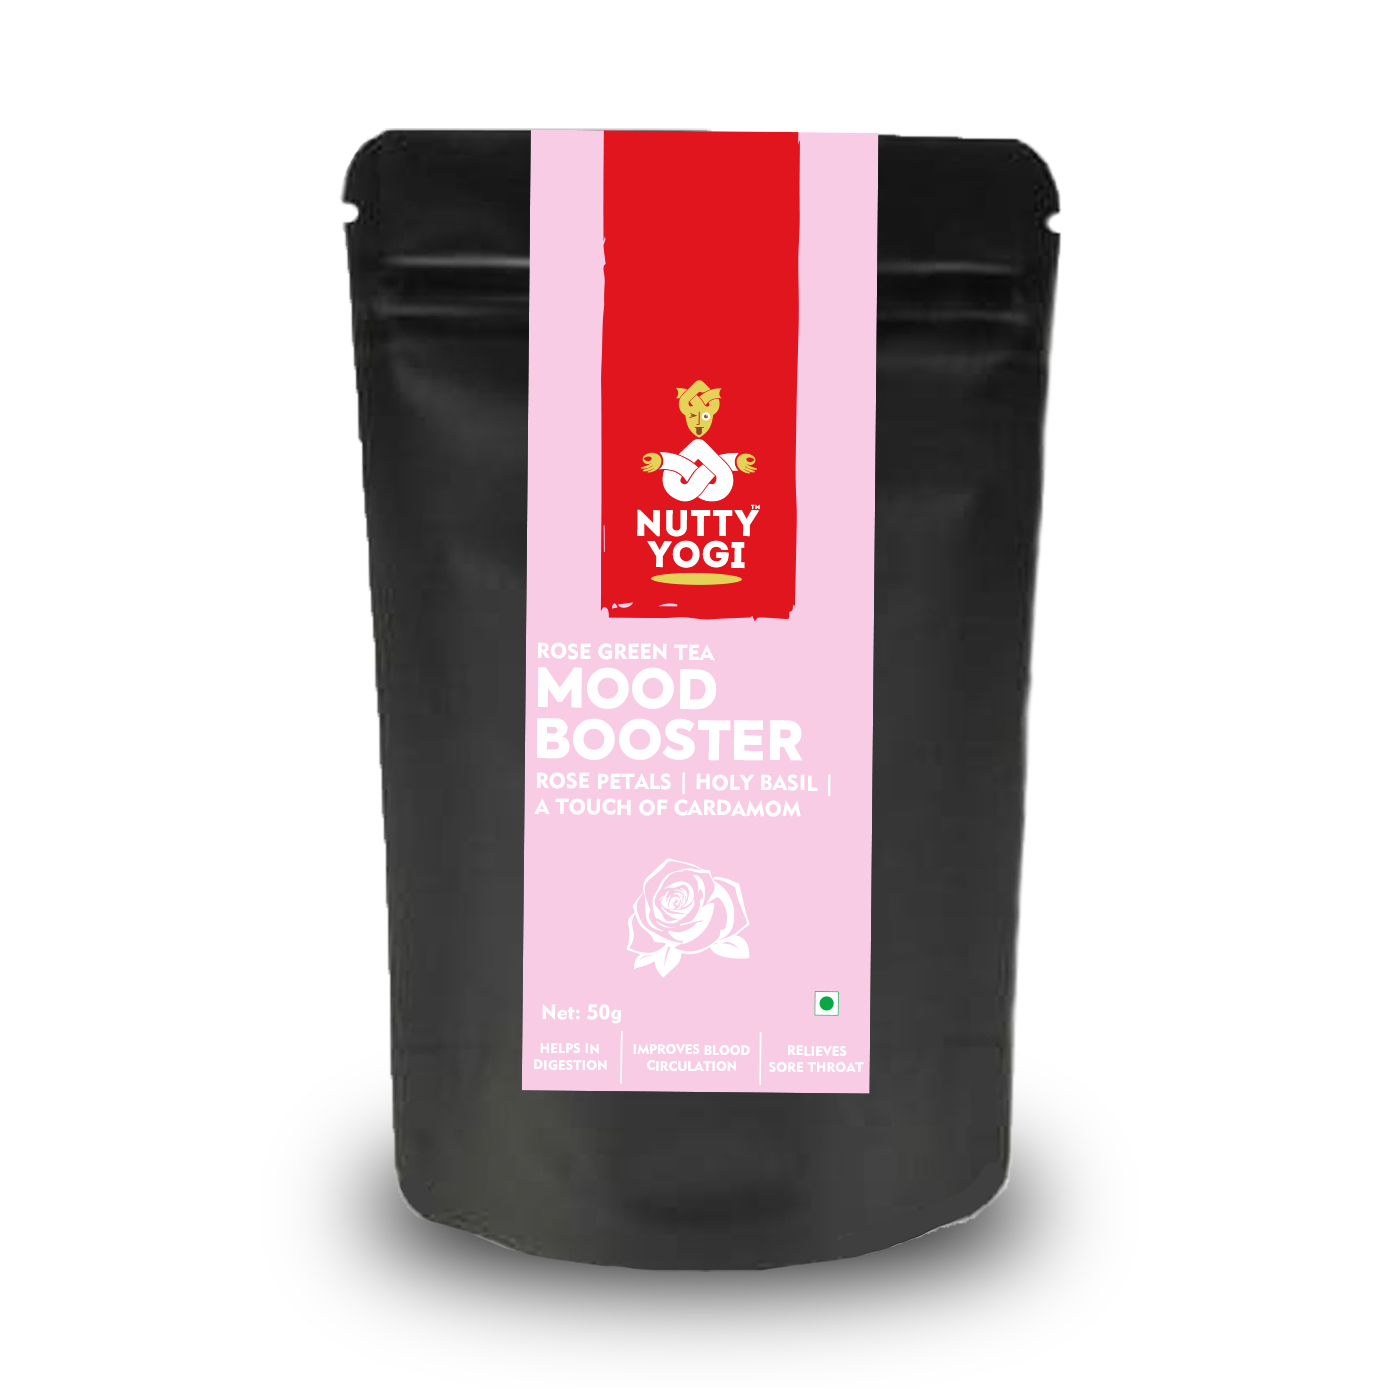 Nutty Yogi Mood Boosters (Mood Booster Tea-50 g, Very Berry Trail Mix-100 g, Cacao Nibs-100 g, Hot Chocolate-100 g)